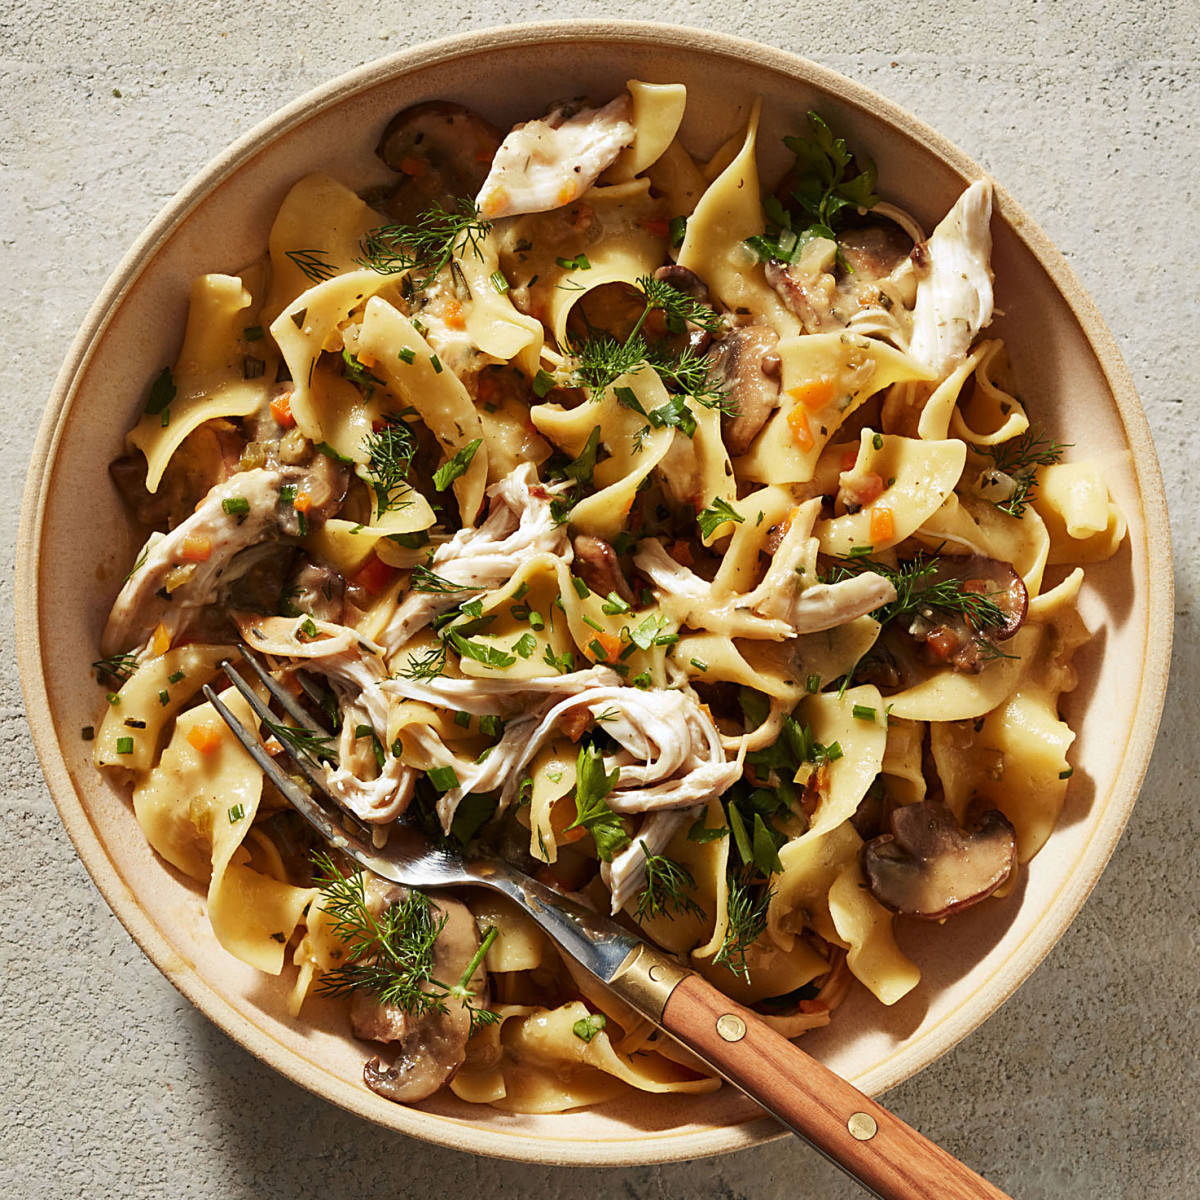 Recipe With Egg Noodles And Chicken
 Creamy Chicken & Mushroom Egg Noodles Recipe Rachael Ray